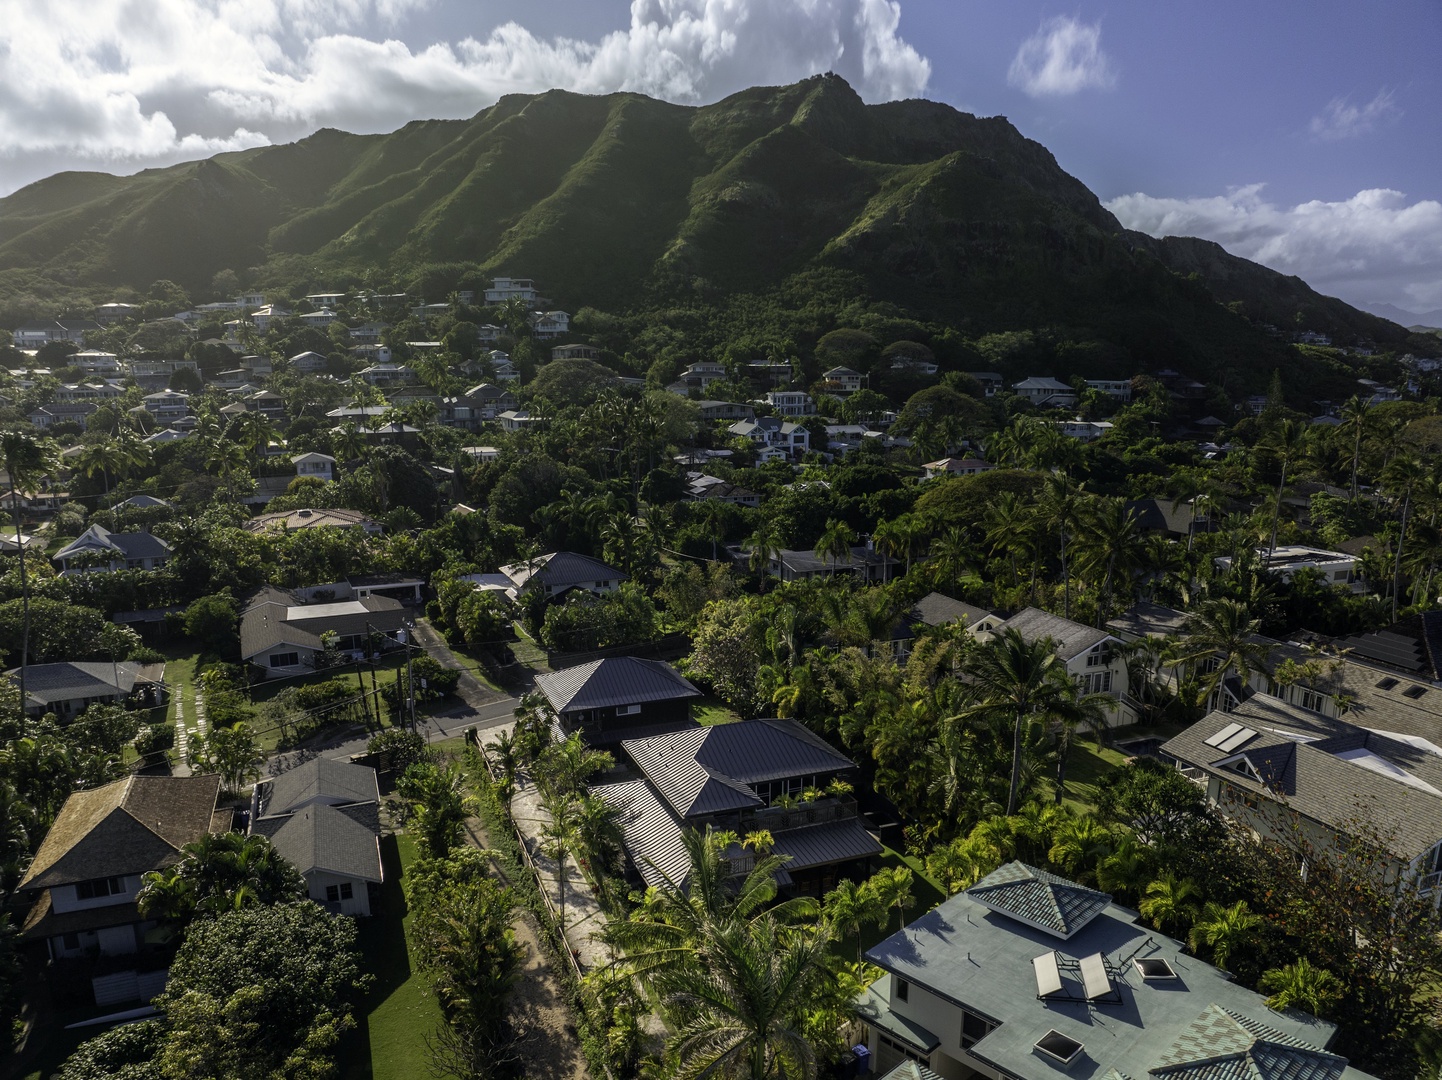 Kailua Vacation Rentals, Mokulua Seaside - Mountain views from the comfort of your home